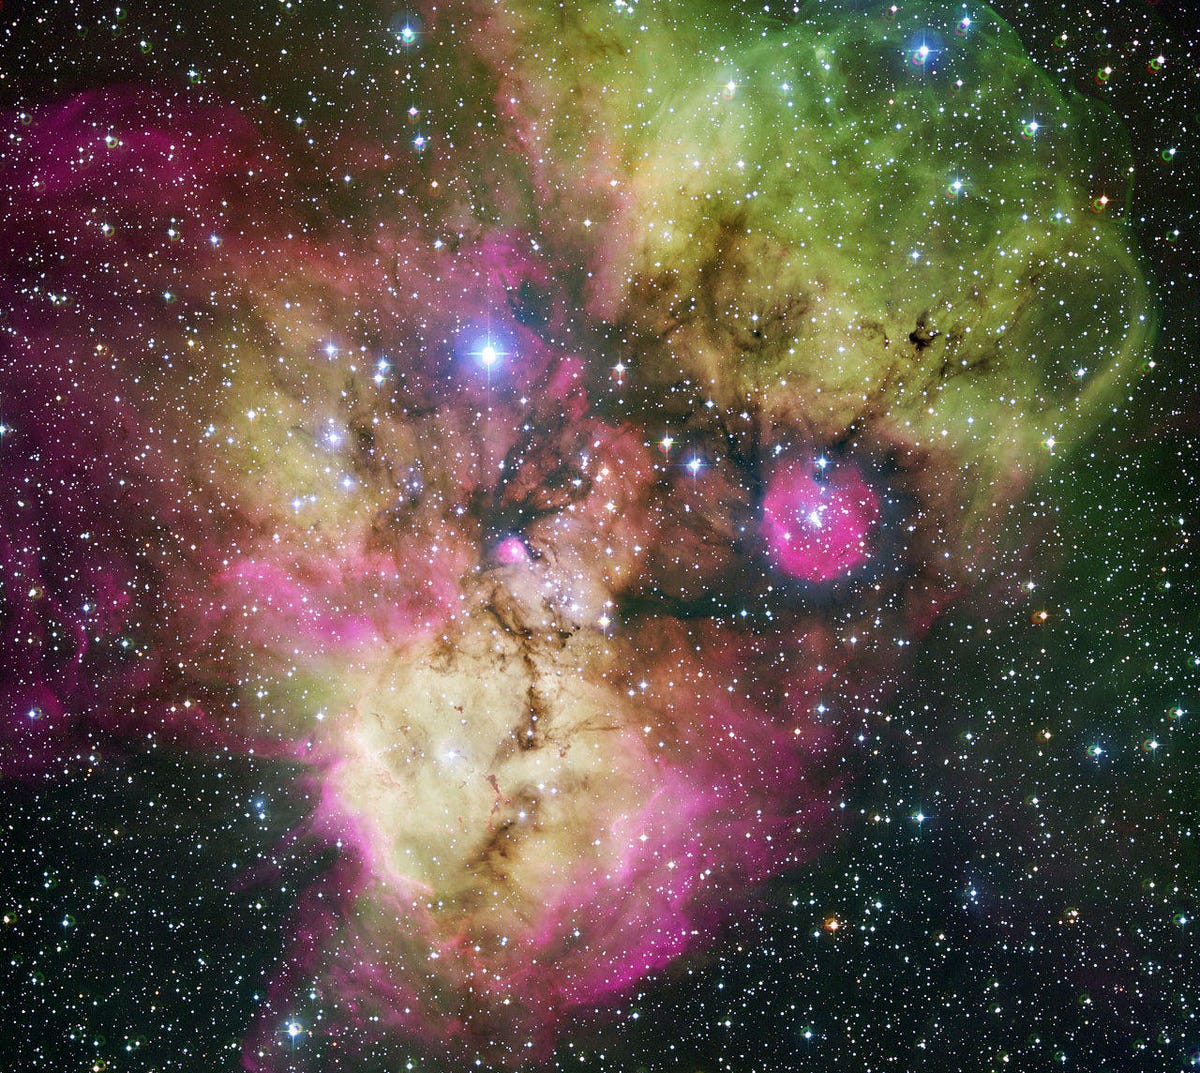 Angry-looking cosmic face seems to be glaring out from a nebula highlighted by ghostly wisps of green and pink.